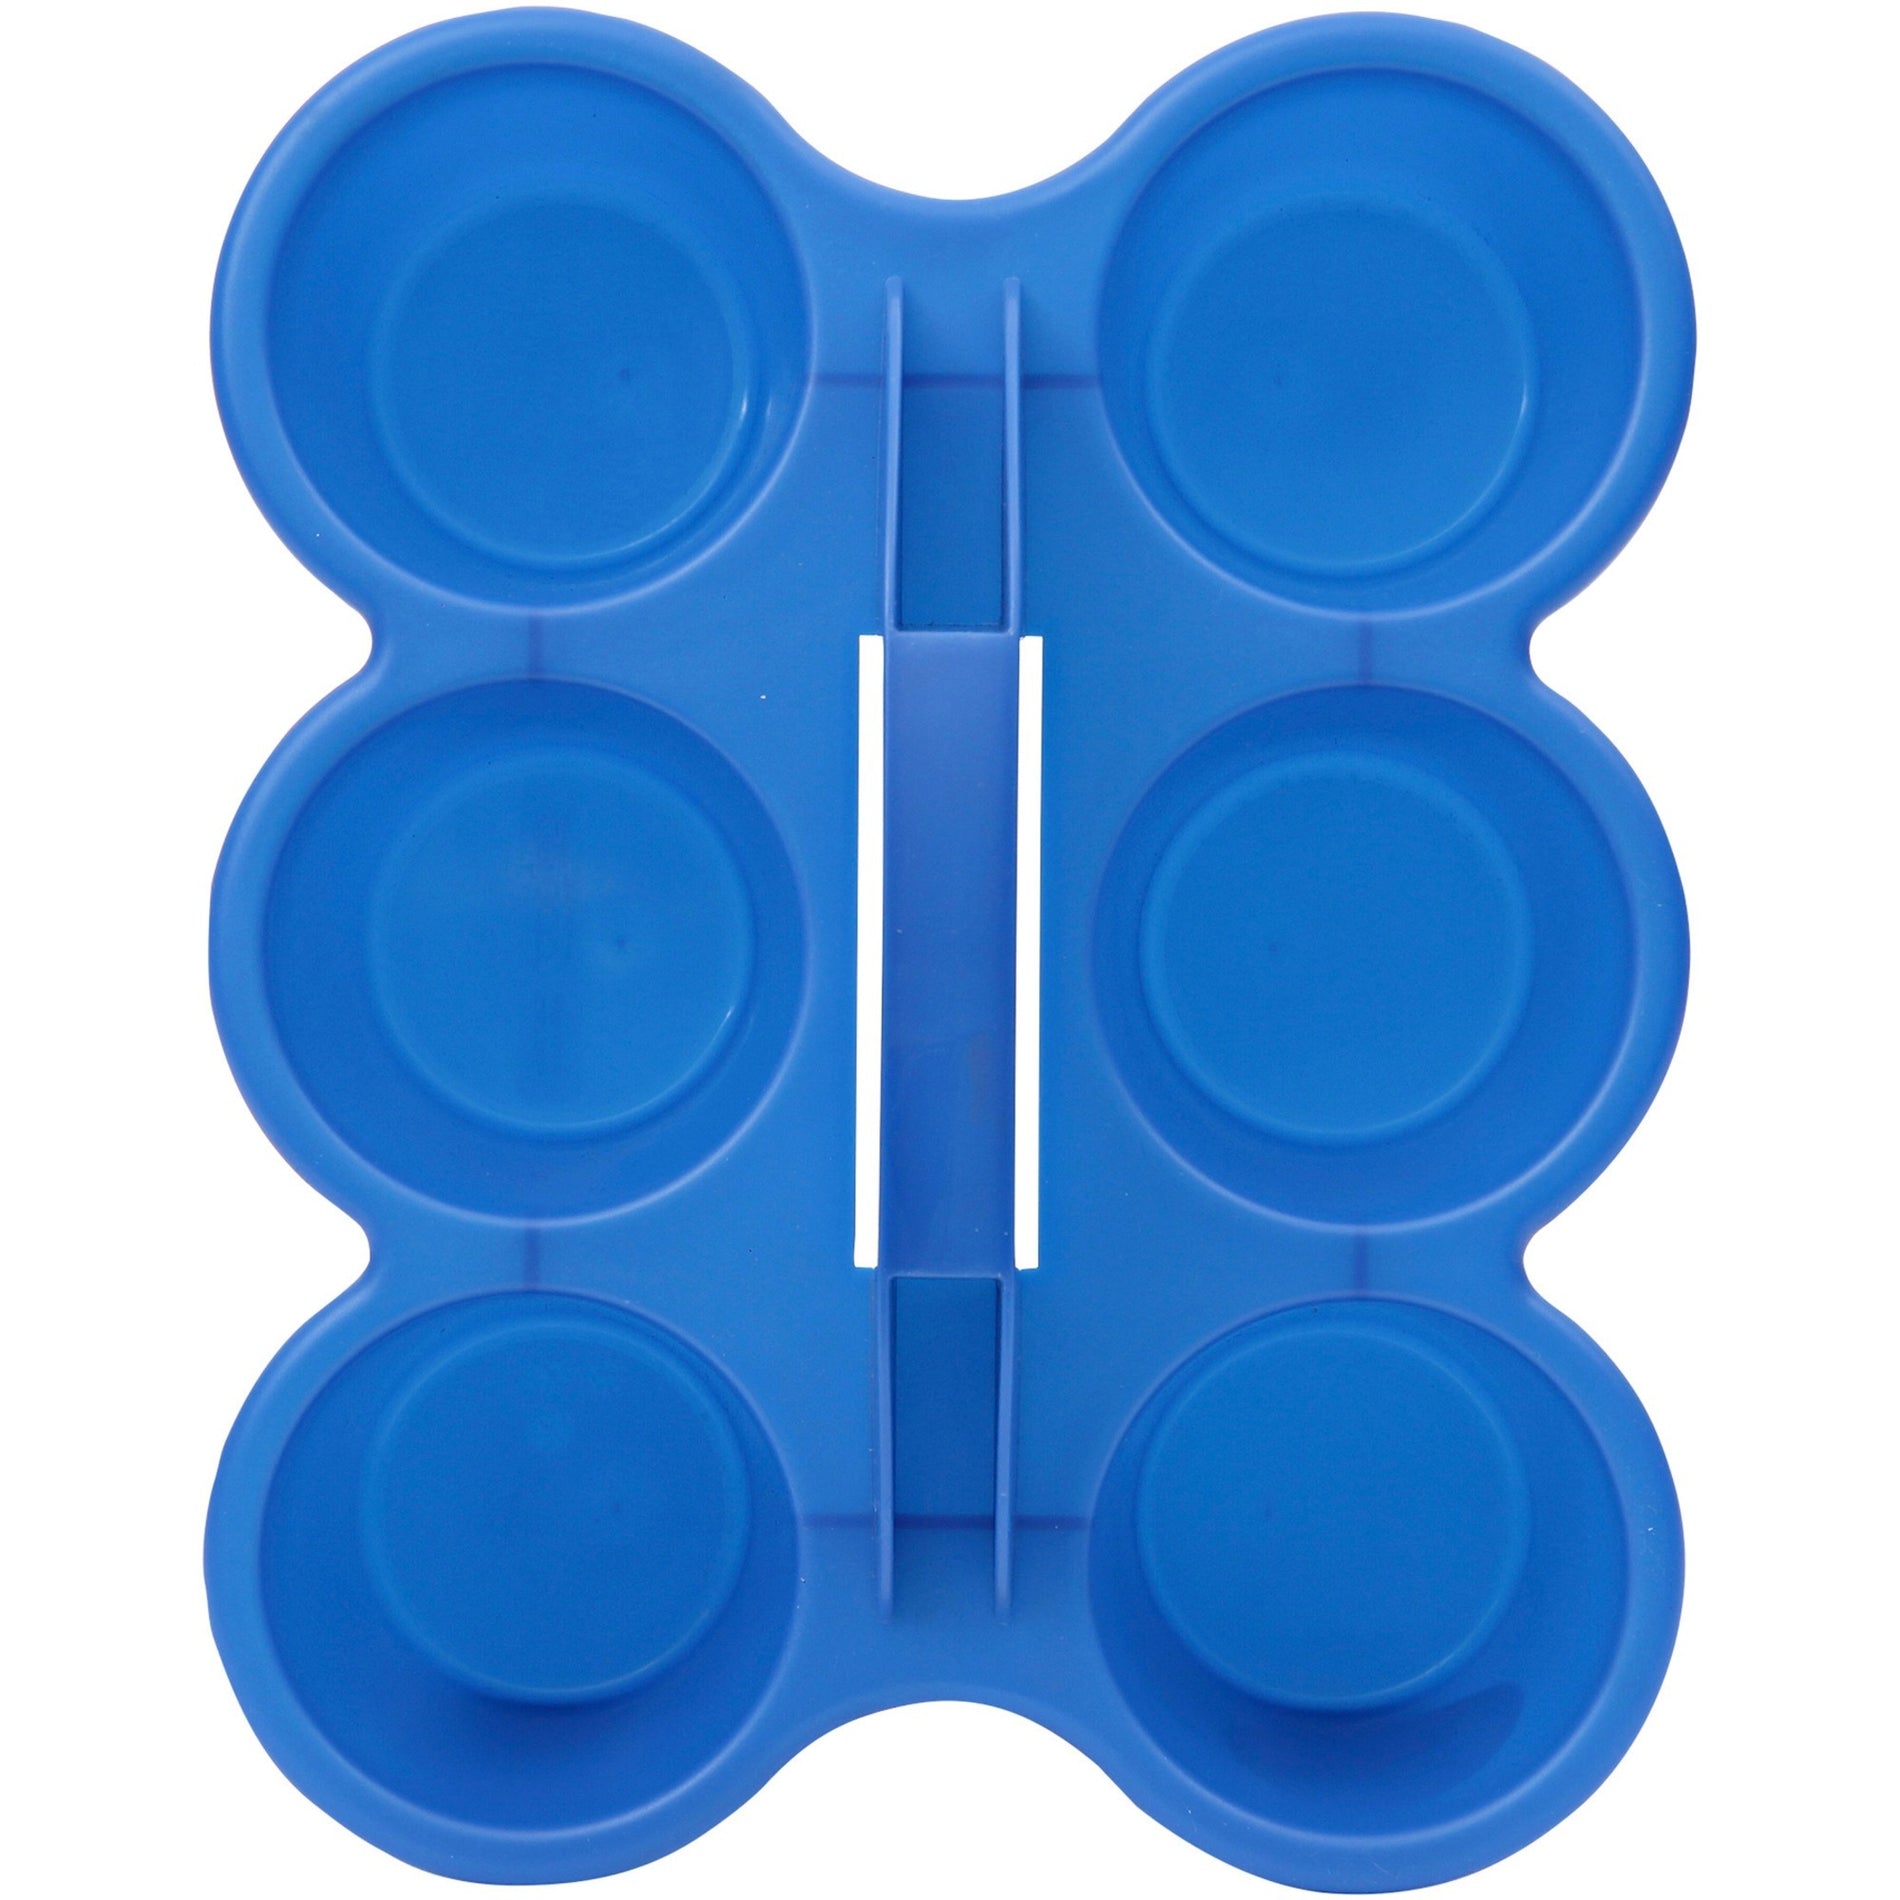 Antimicrobial Kids 6 Cup Caddy - Stackable, Easy to Clean, Portable [Discontinued]